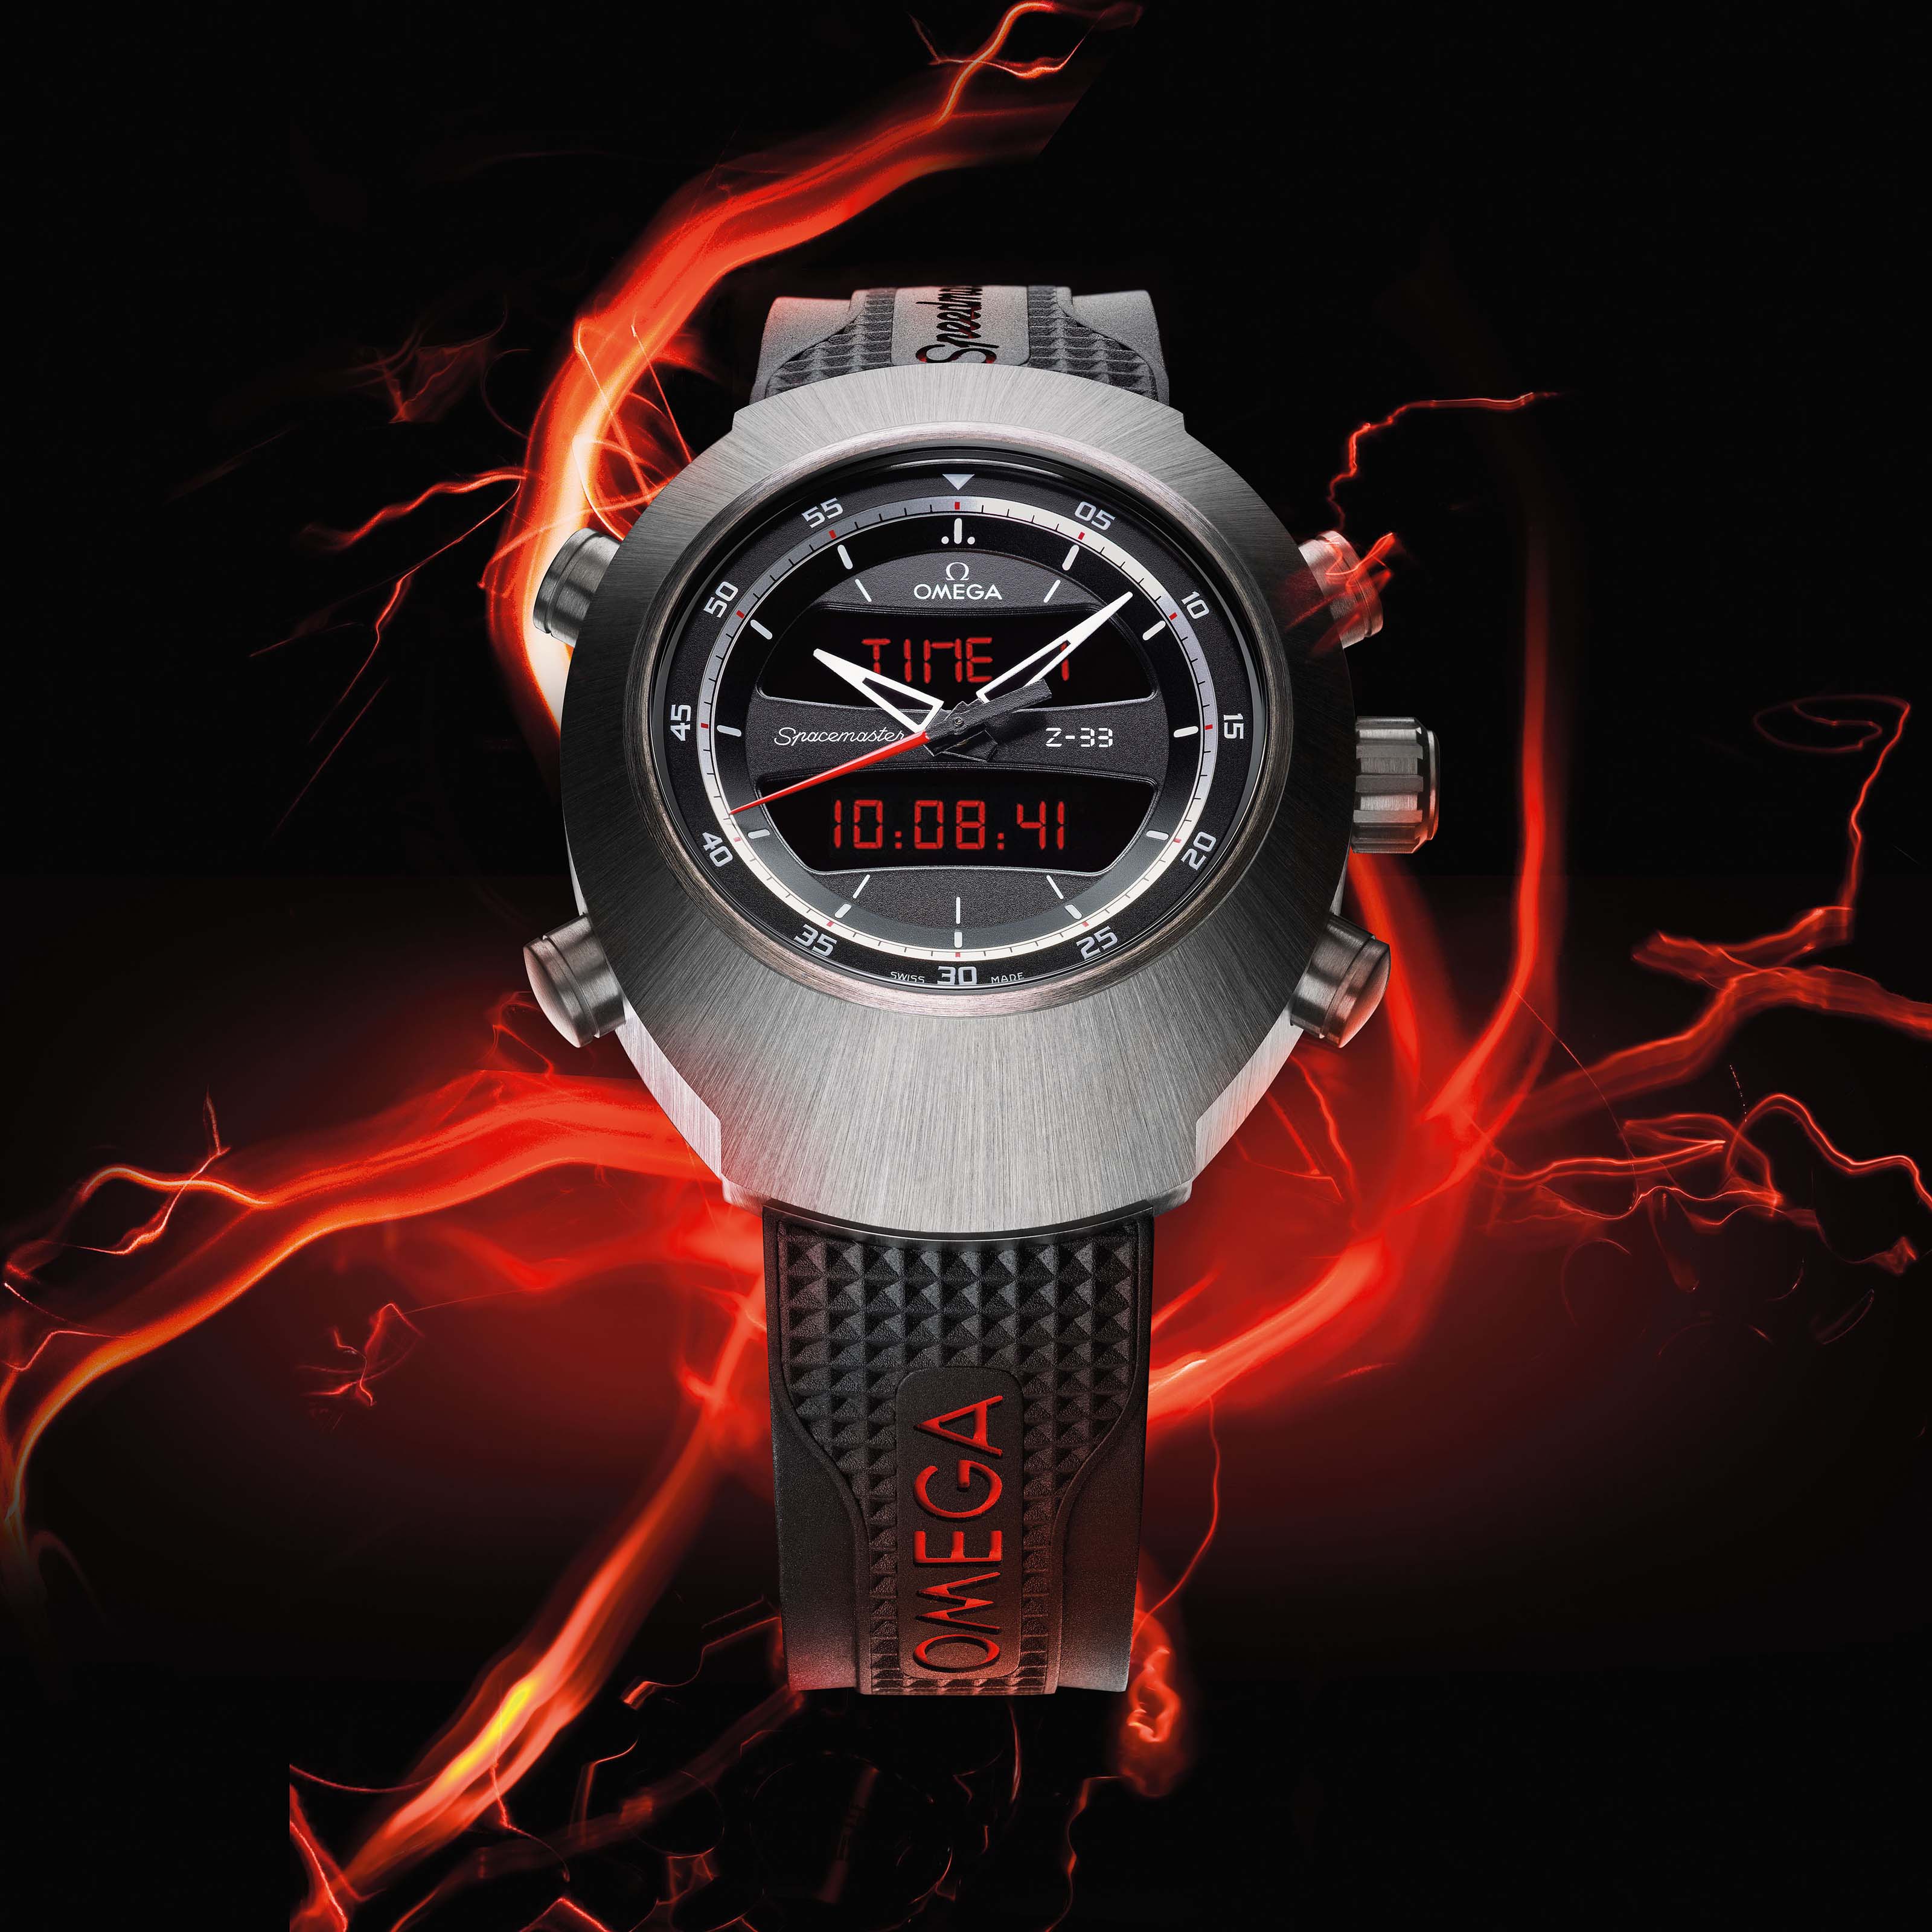 Omega Spacemaster Z-33 watch 